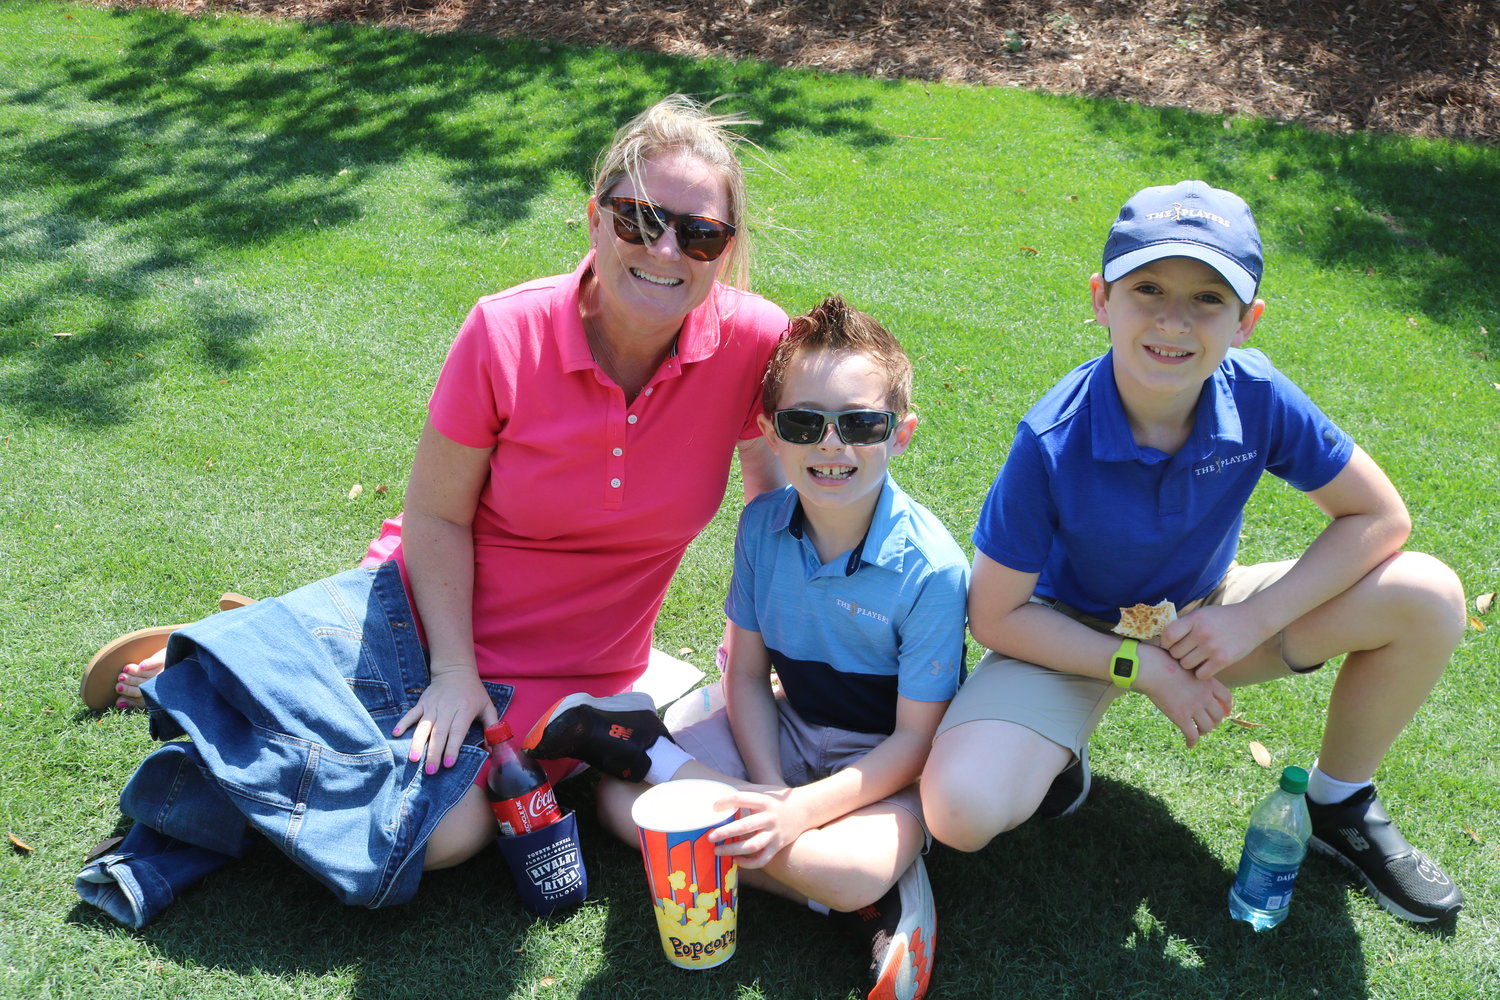 Fans enjoyed a beautiful day of weather and golf Wednesday March 8 at THE PLAYERS.